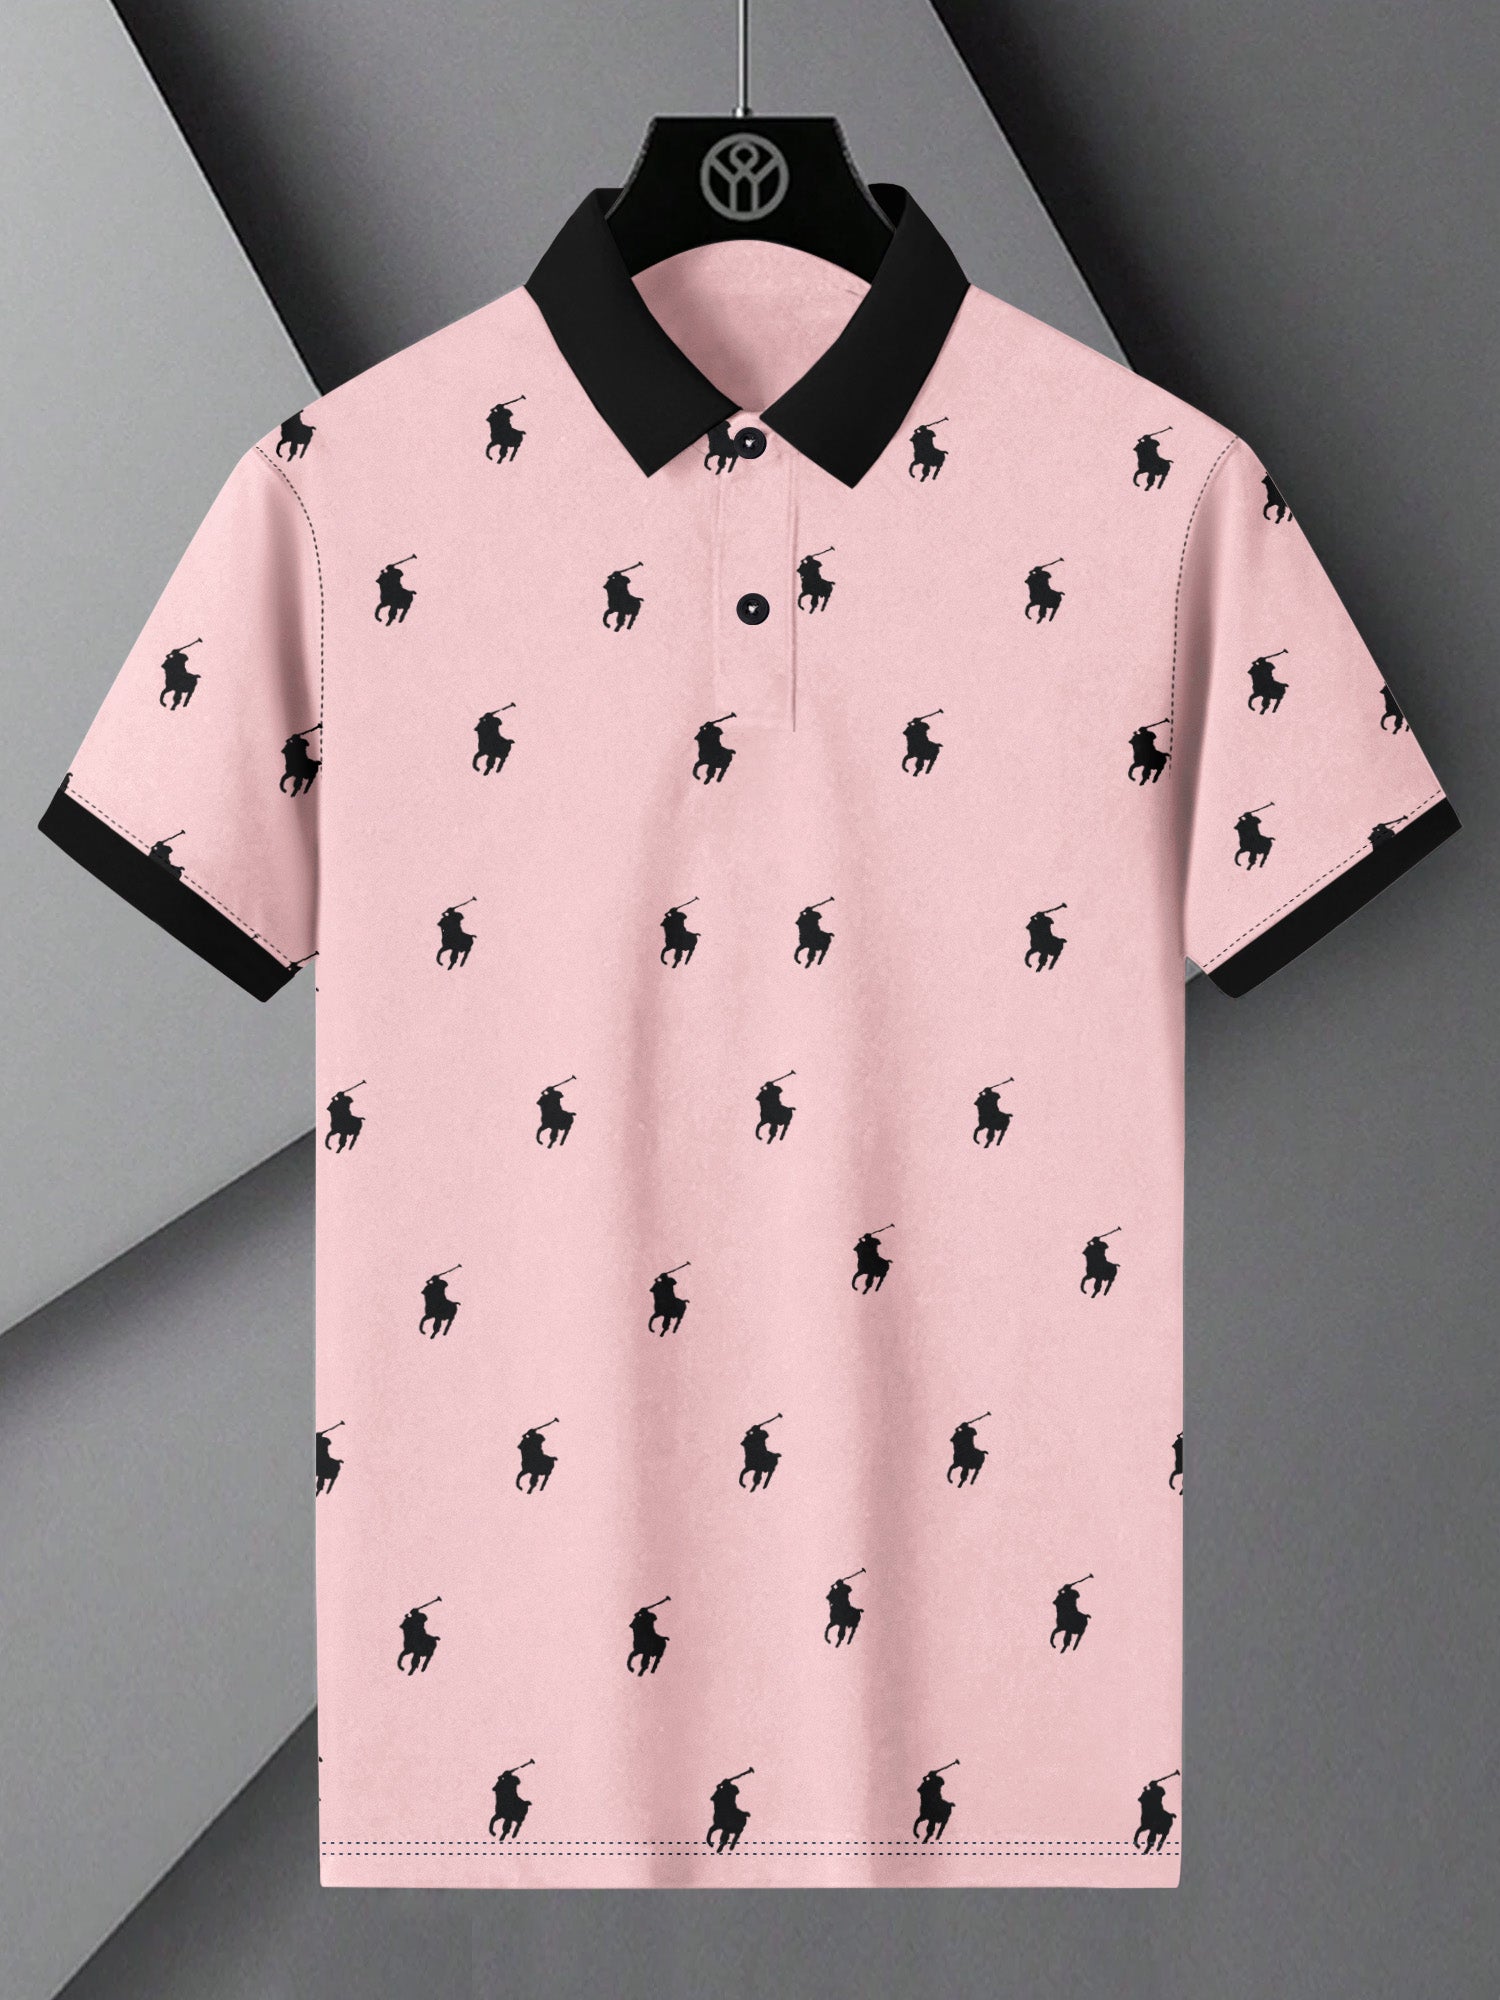 PRL Summer Polo Shirt For Men-Light Pink with Allover Print-BE752/BR13000